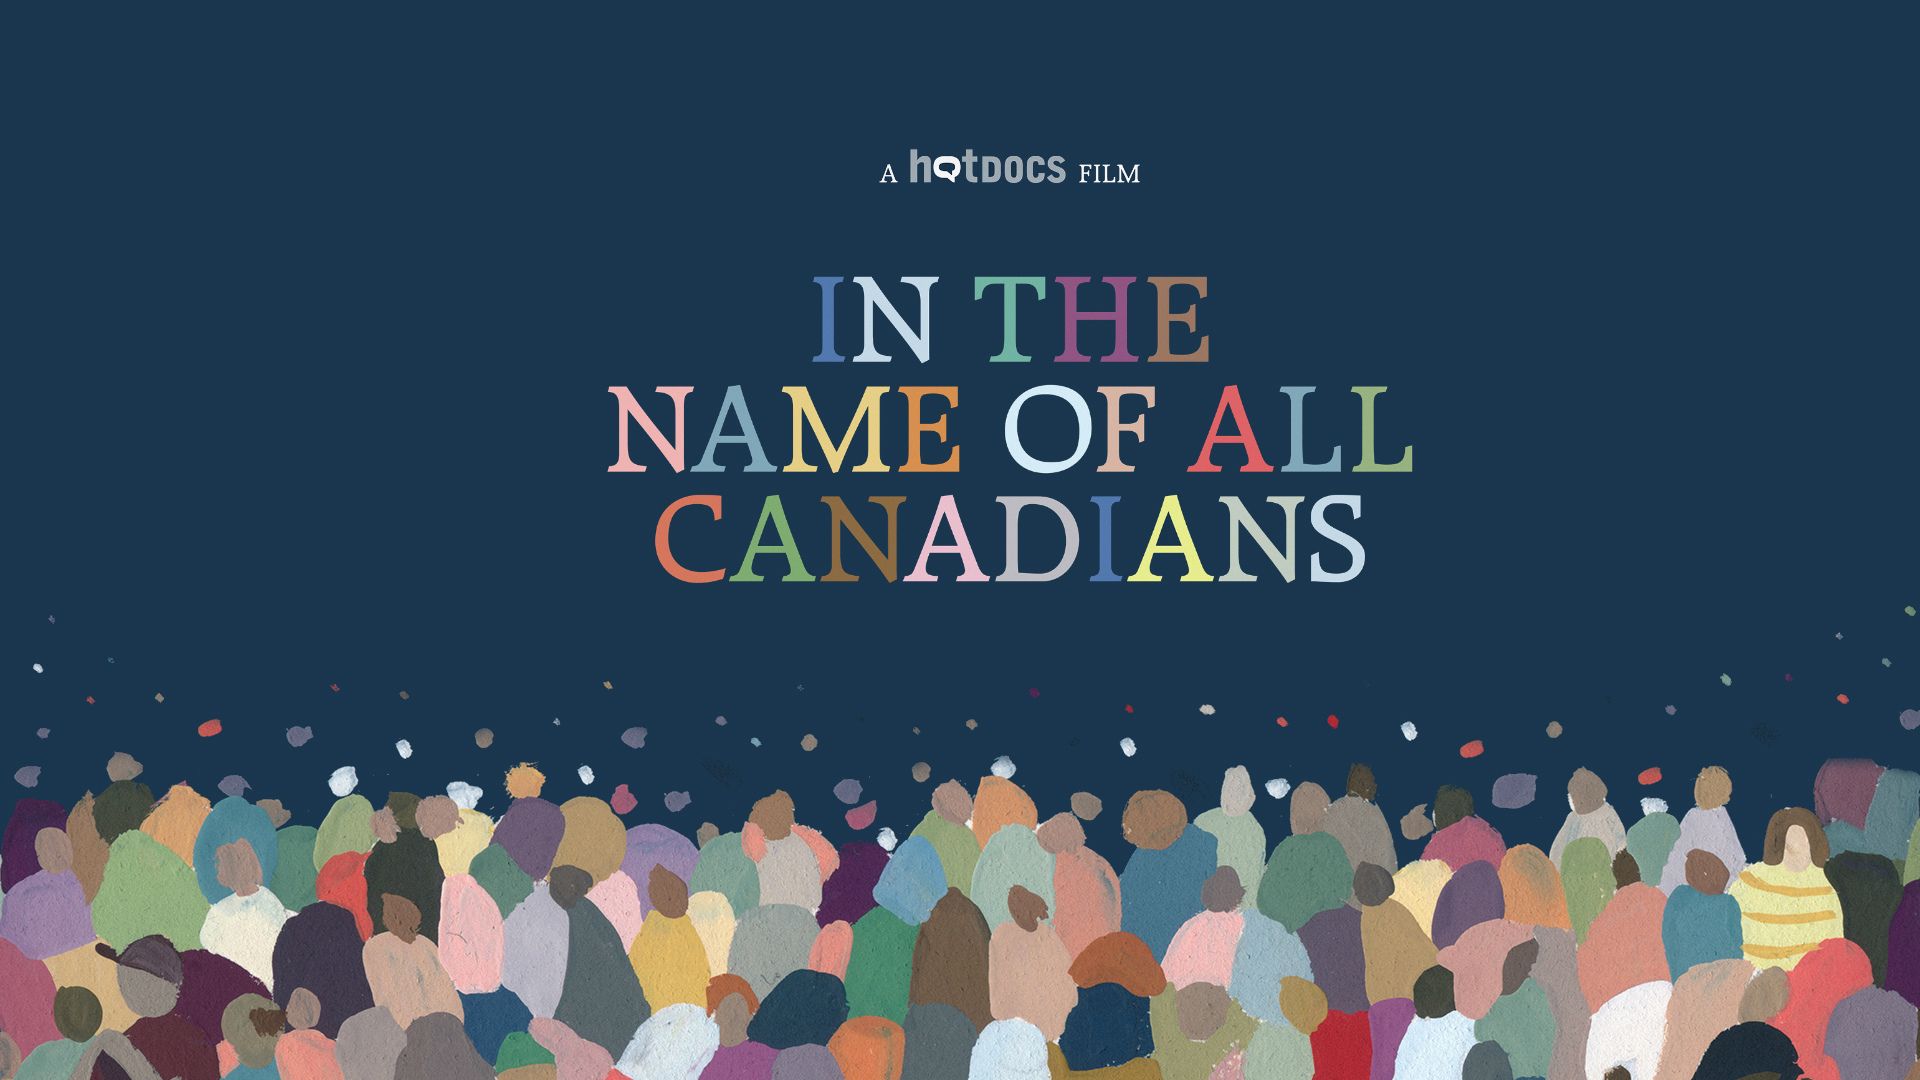 Promotional graphic banner for documentary film In the Name of All Canadians.